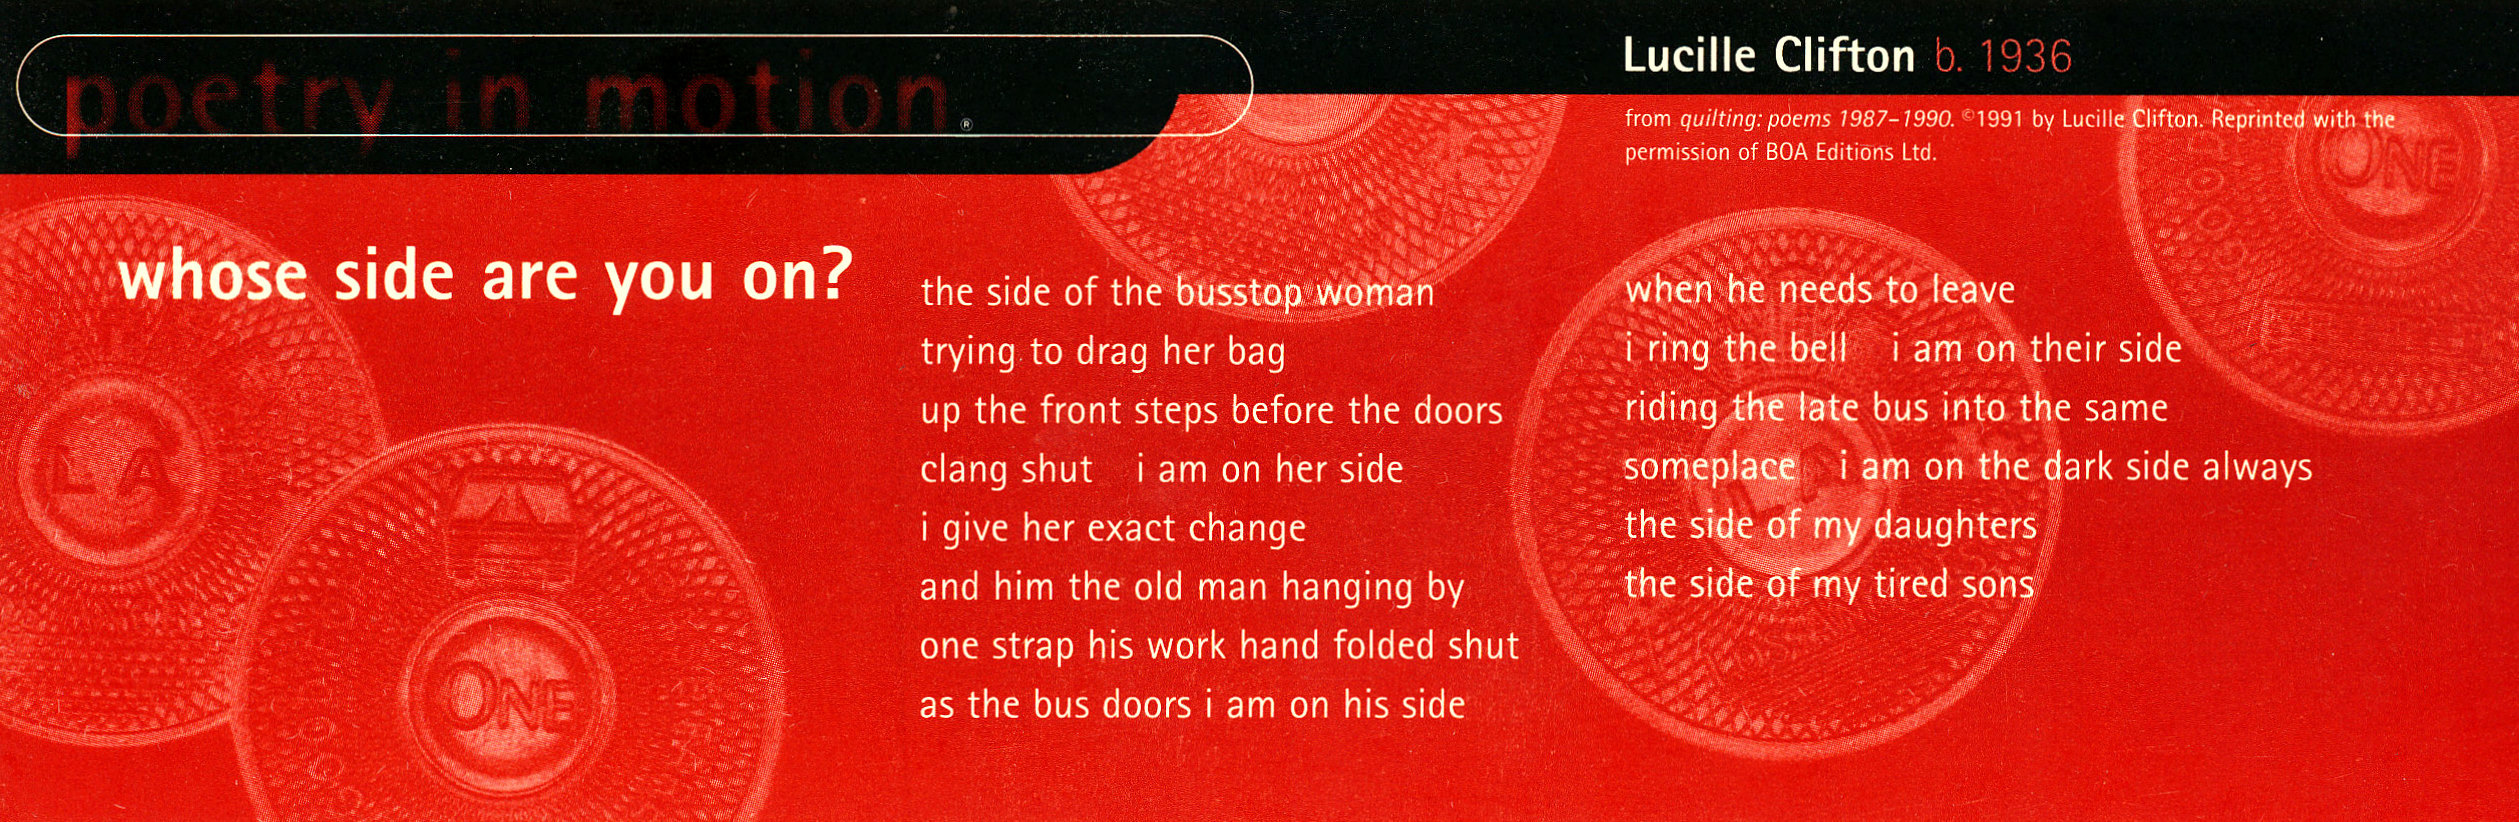 A vertical red poster decorated with Los Angeles transit tokens features a poem titled whose side are you on, by Lucille Clifton